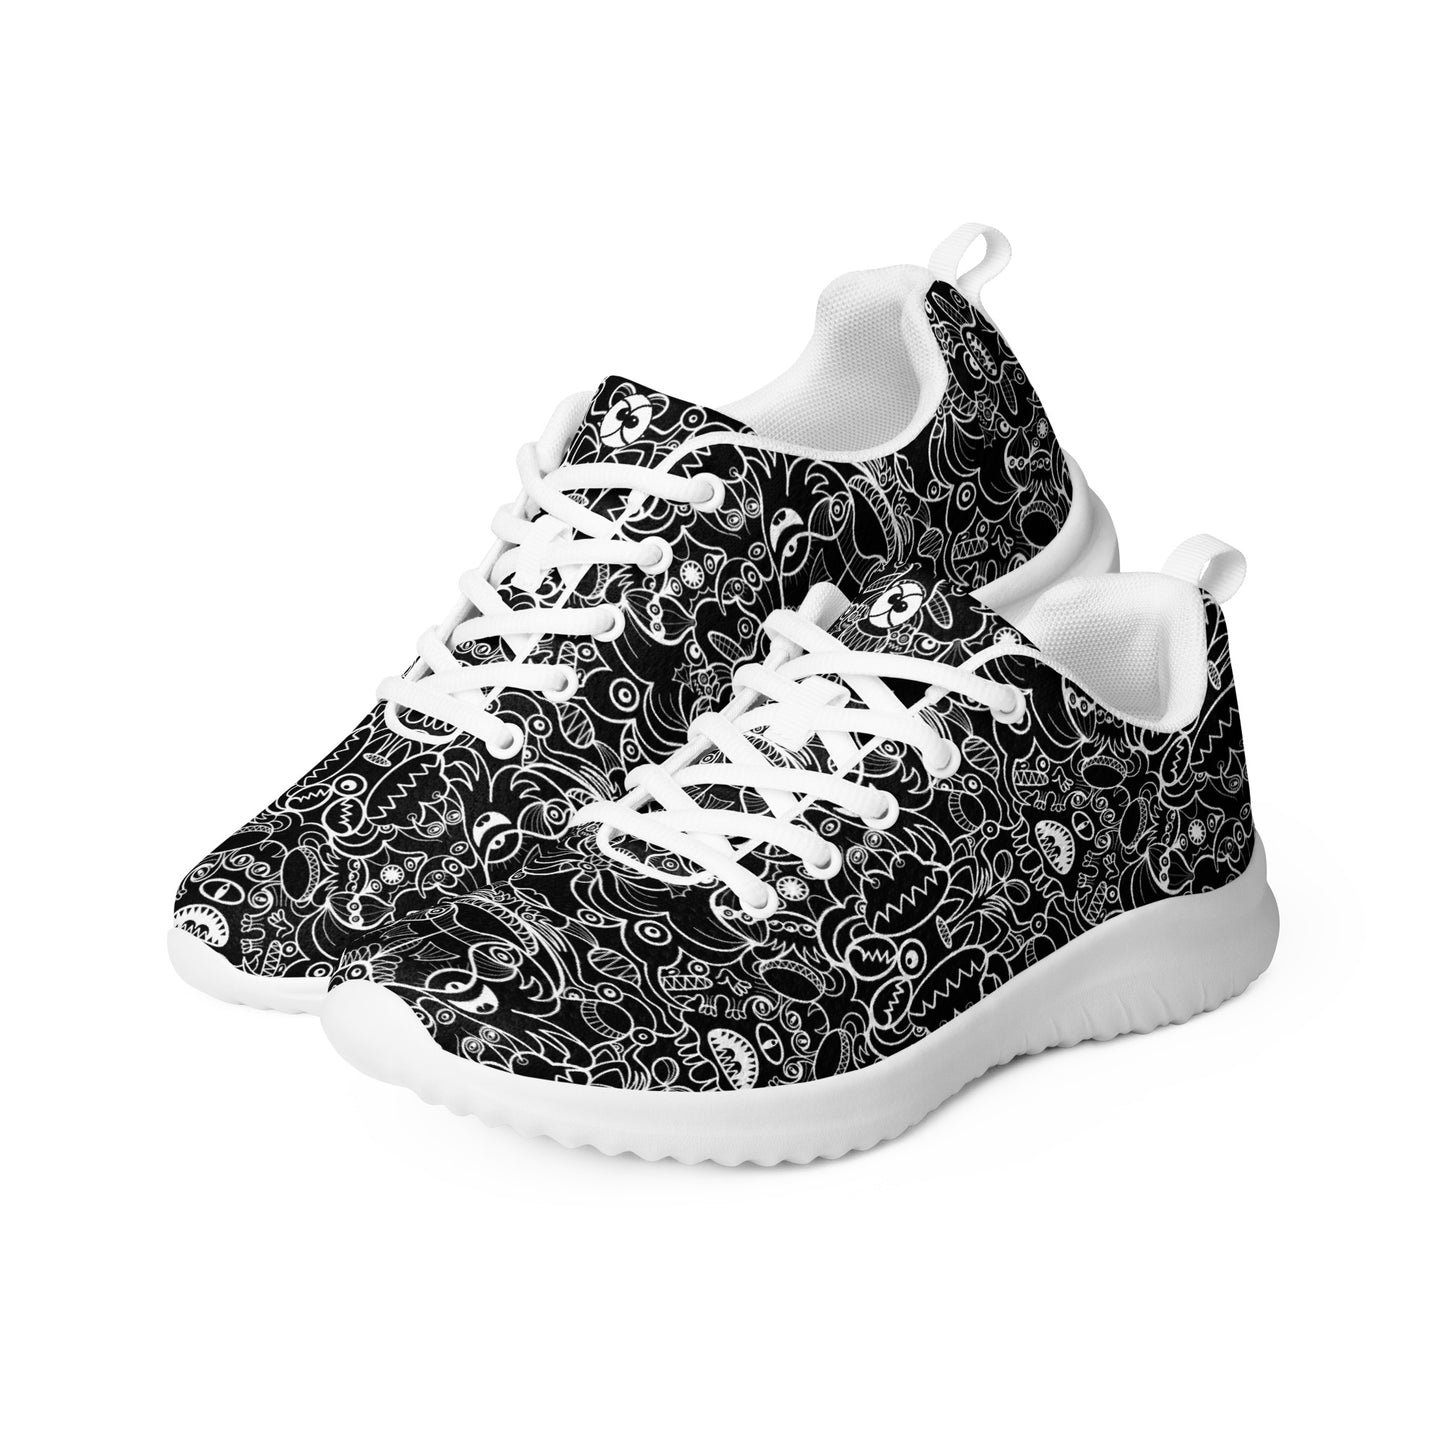 The powerful dark side of the Doodle world Men’s athletic shoes. Overview